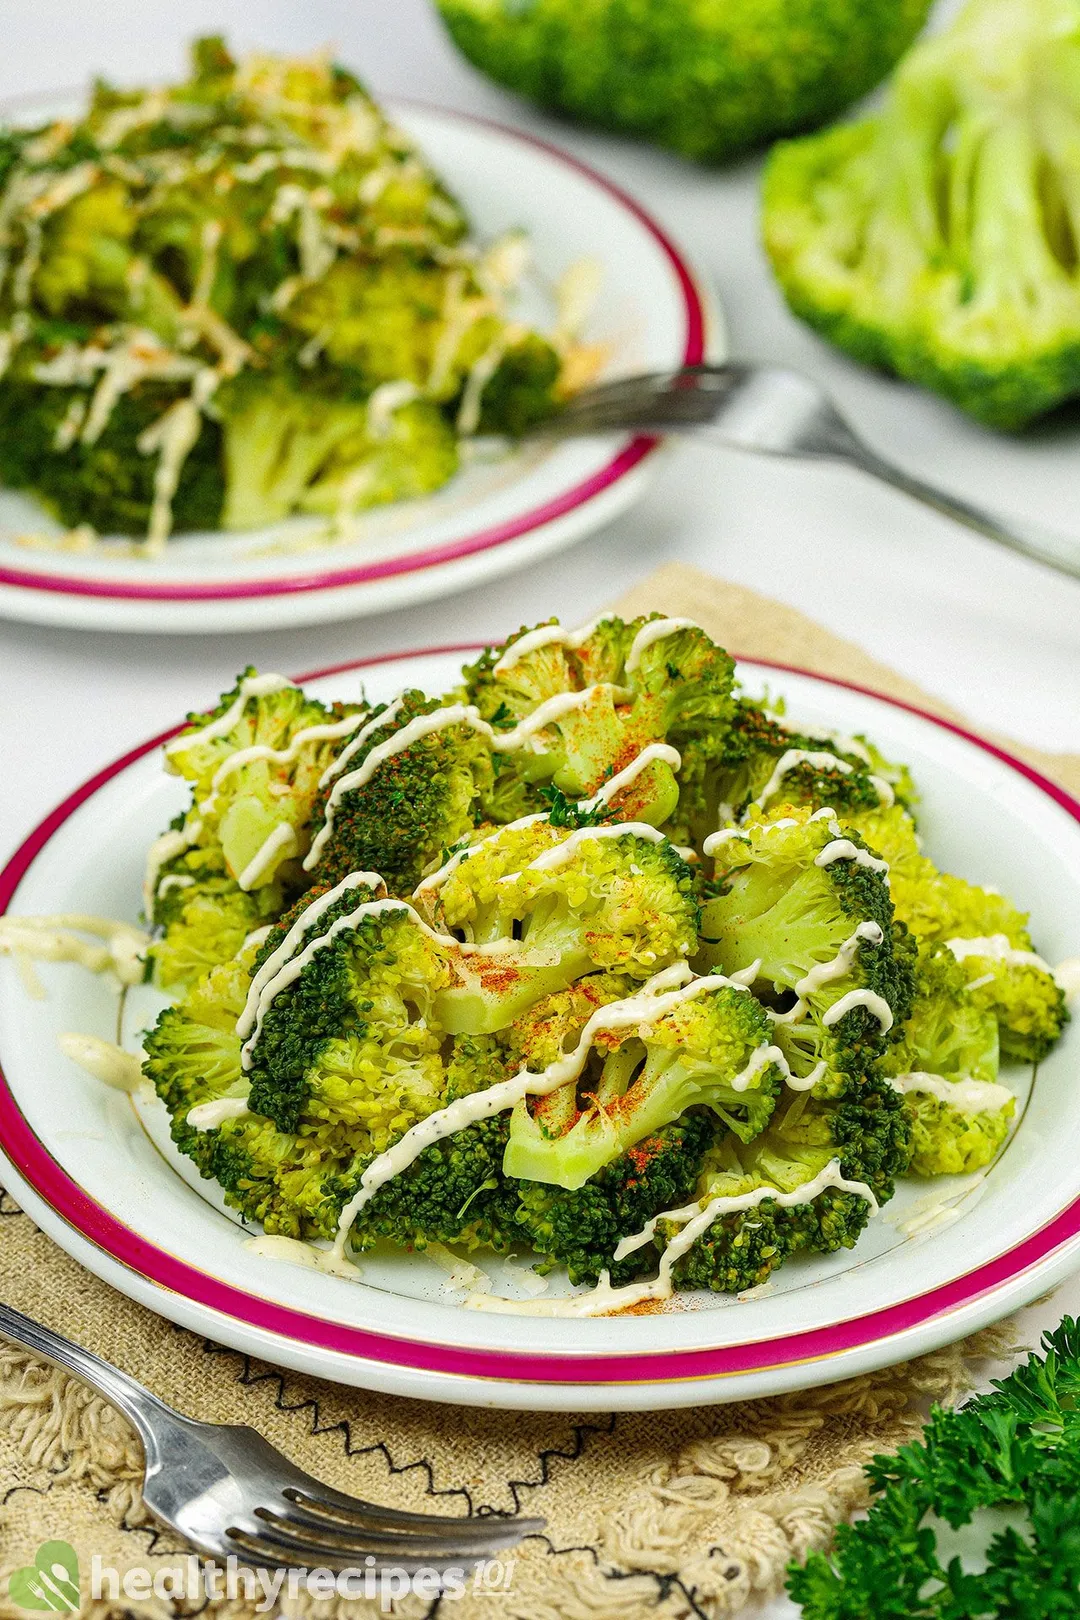 a plate of steamed broccoli with another plate in background